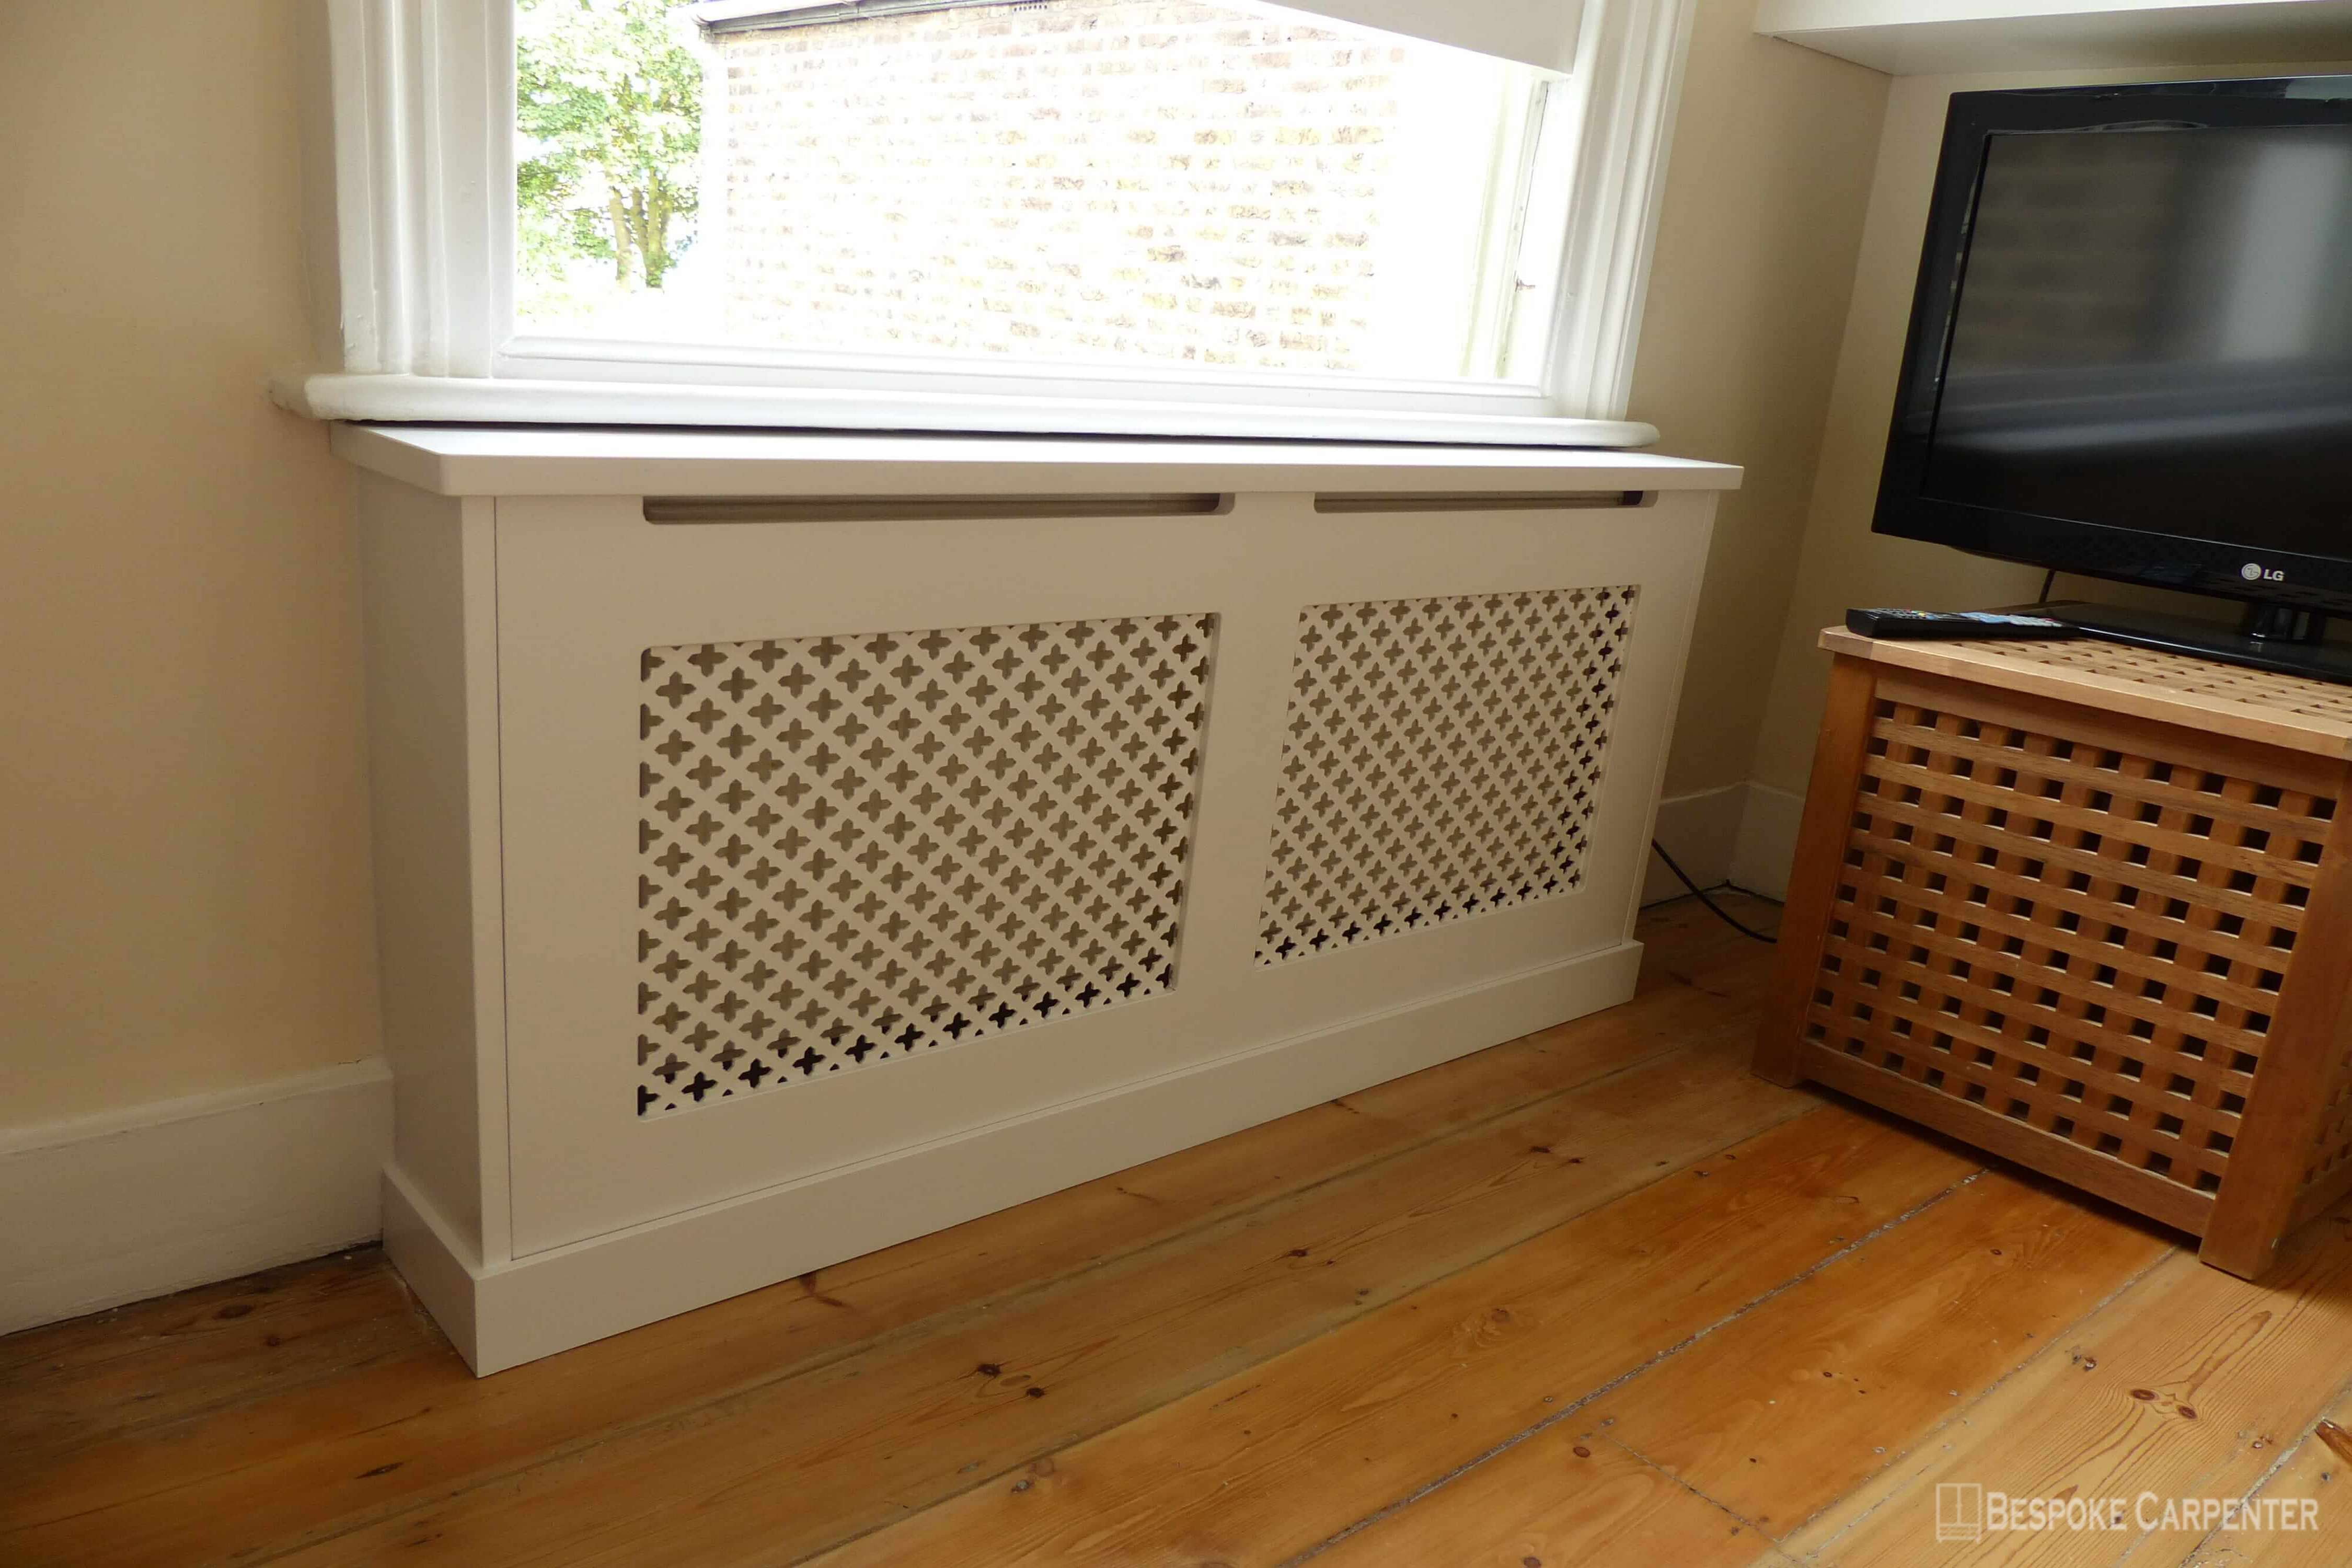 Bespoke carpentry and joinery in Little Heath